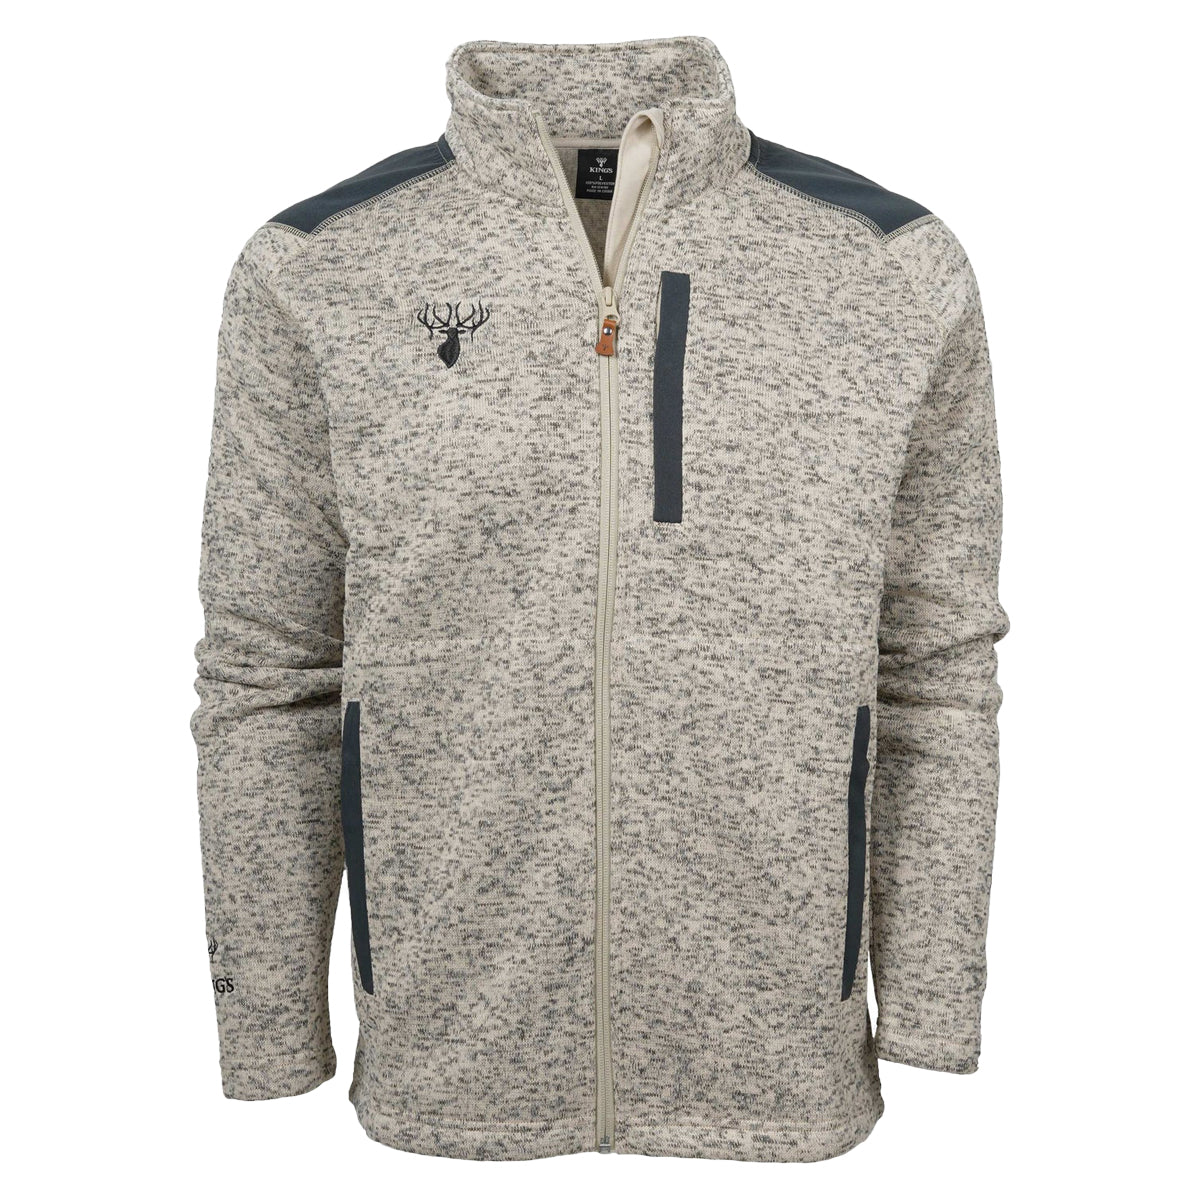 King's Lifestyle Full-Zip Sweater in  by GOHUNT | King's - GOHUNT Shop